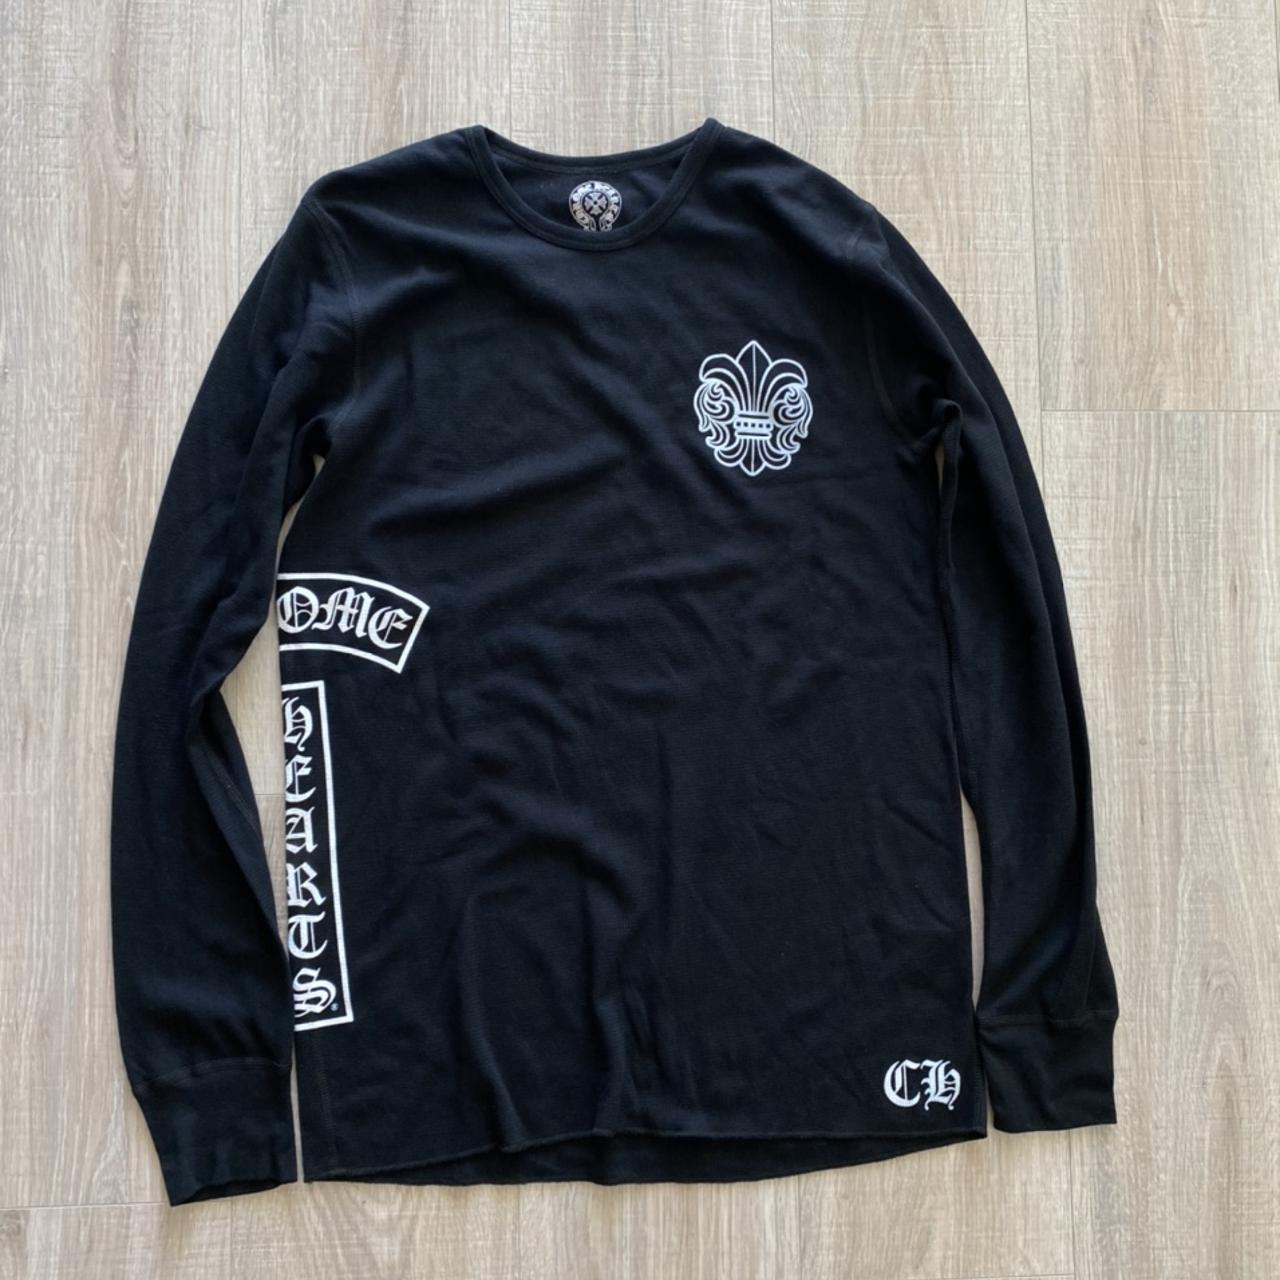 For sale is a brand new Chrome hearts thermal shirt - Depop